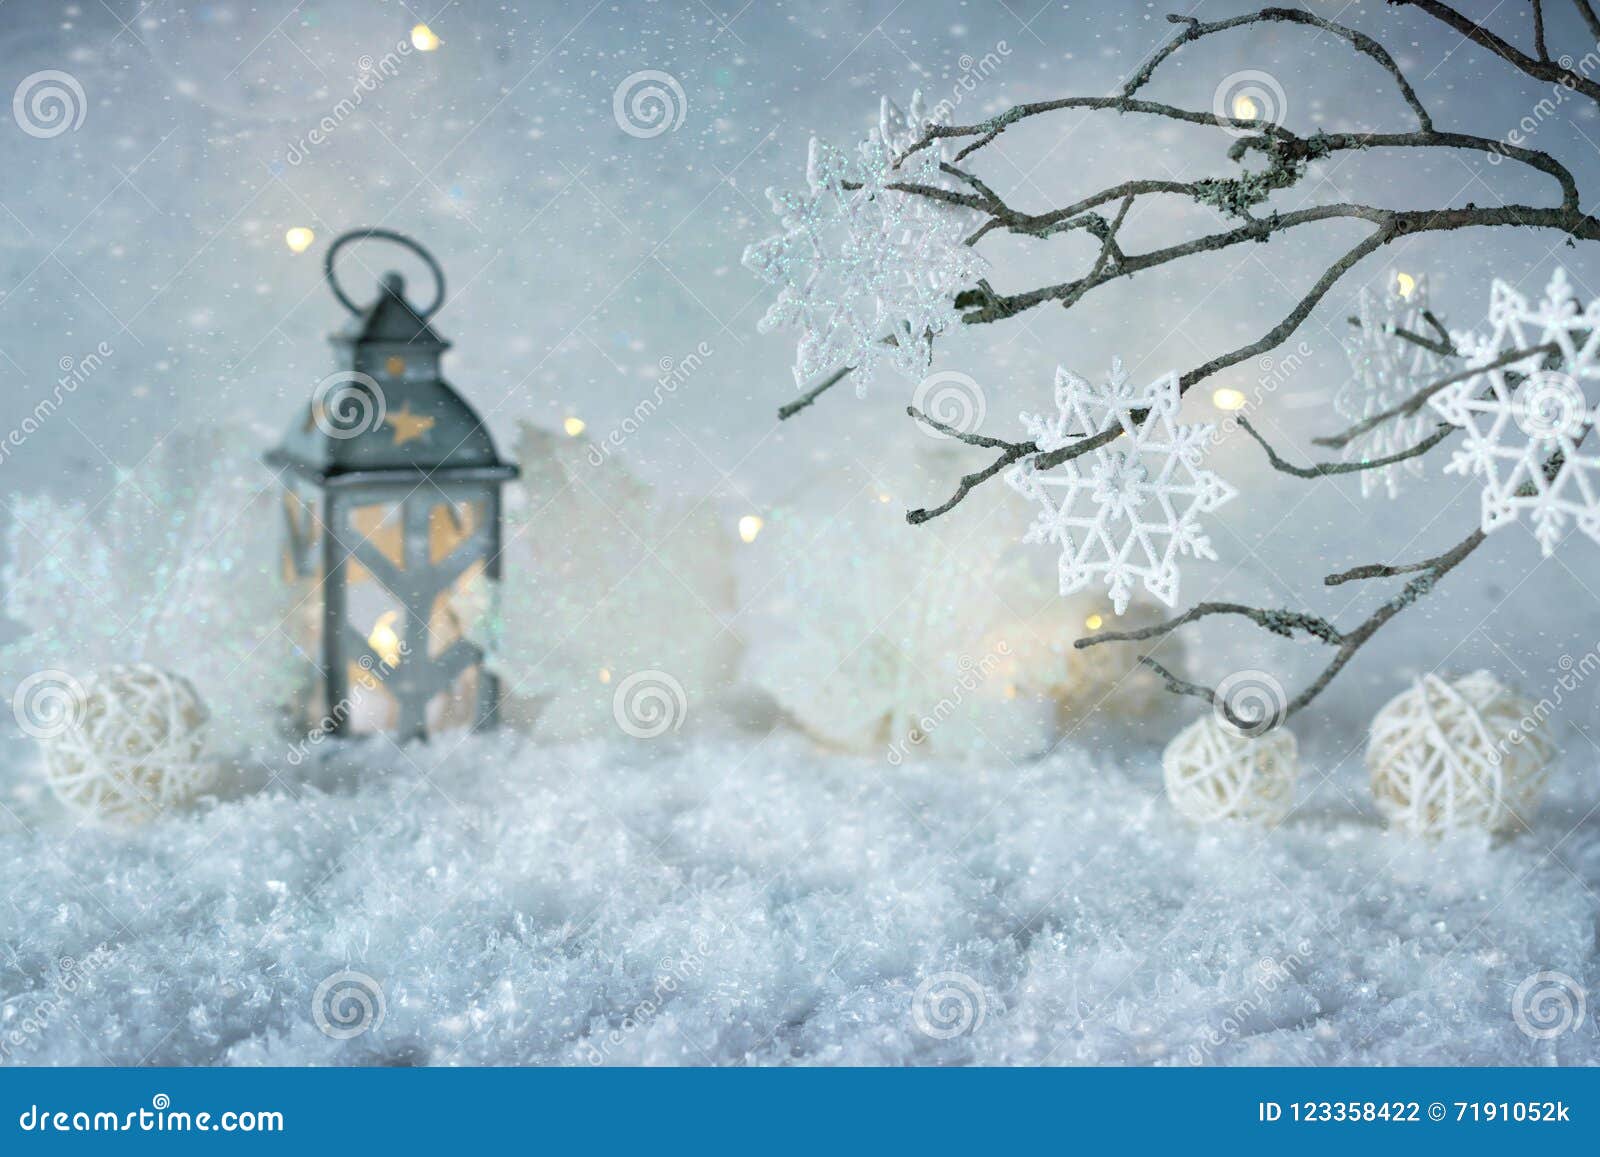 Frosty Winter Wonderland with Snowfall and Magic Lights. Christmas ...